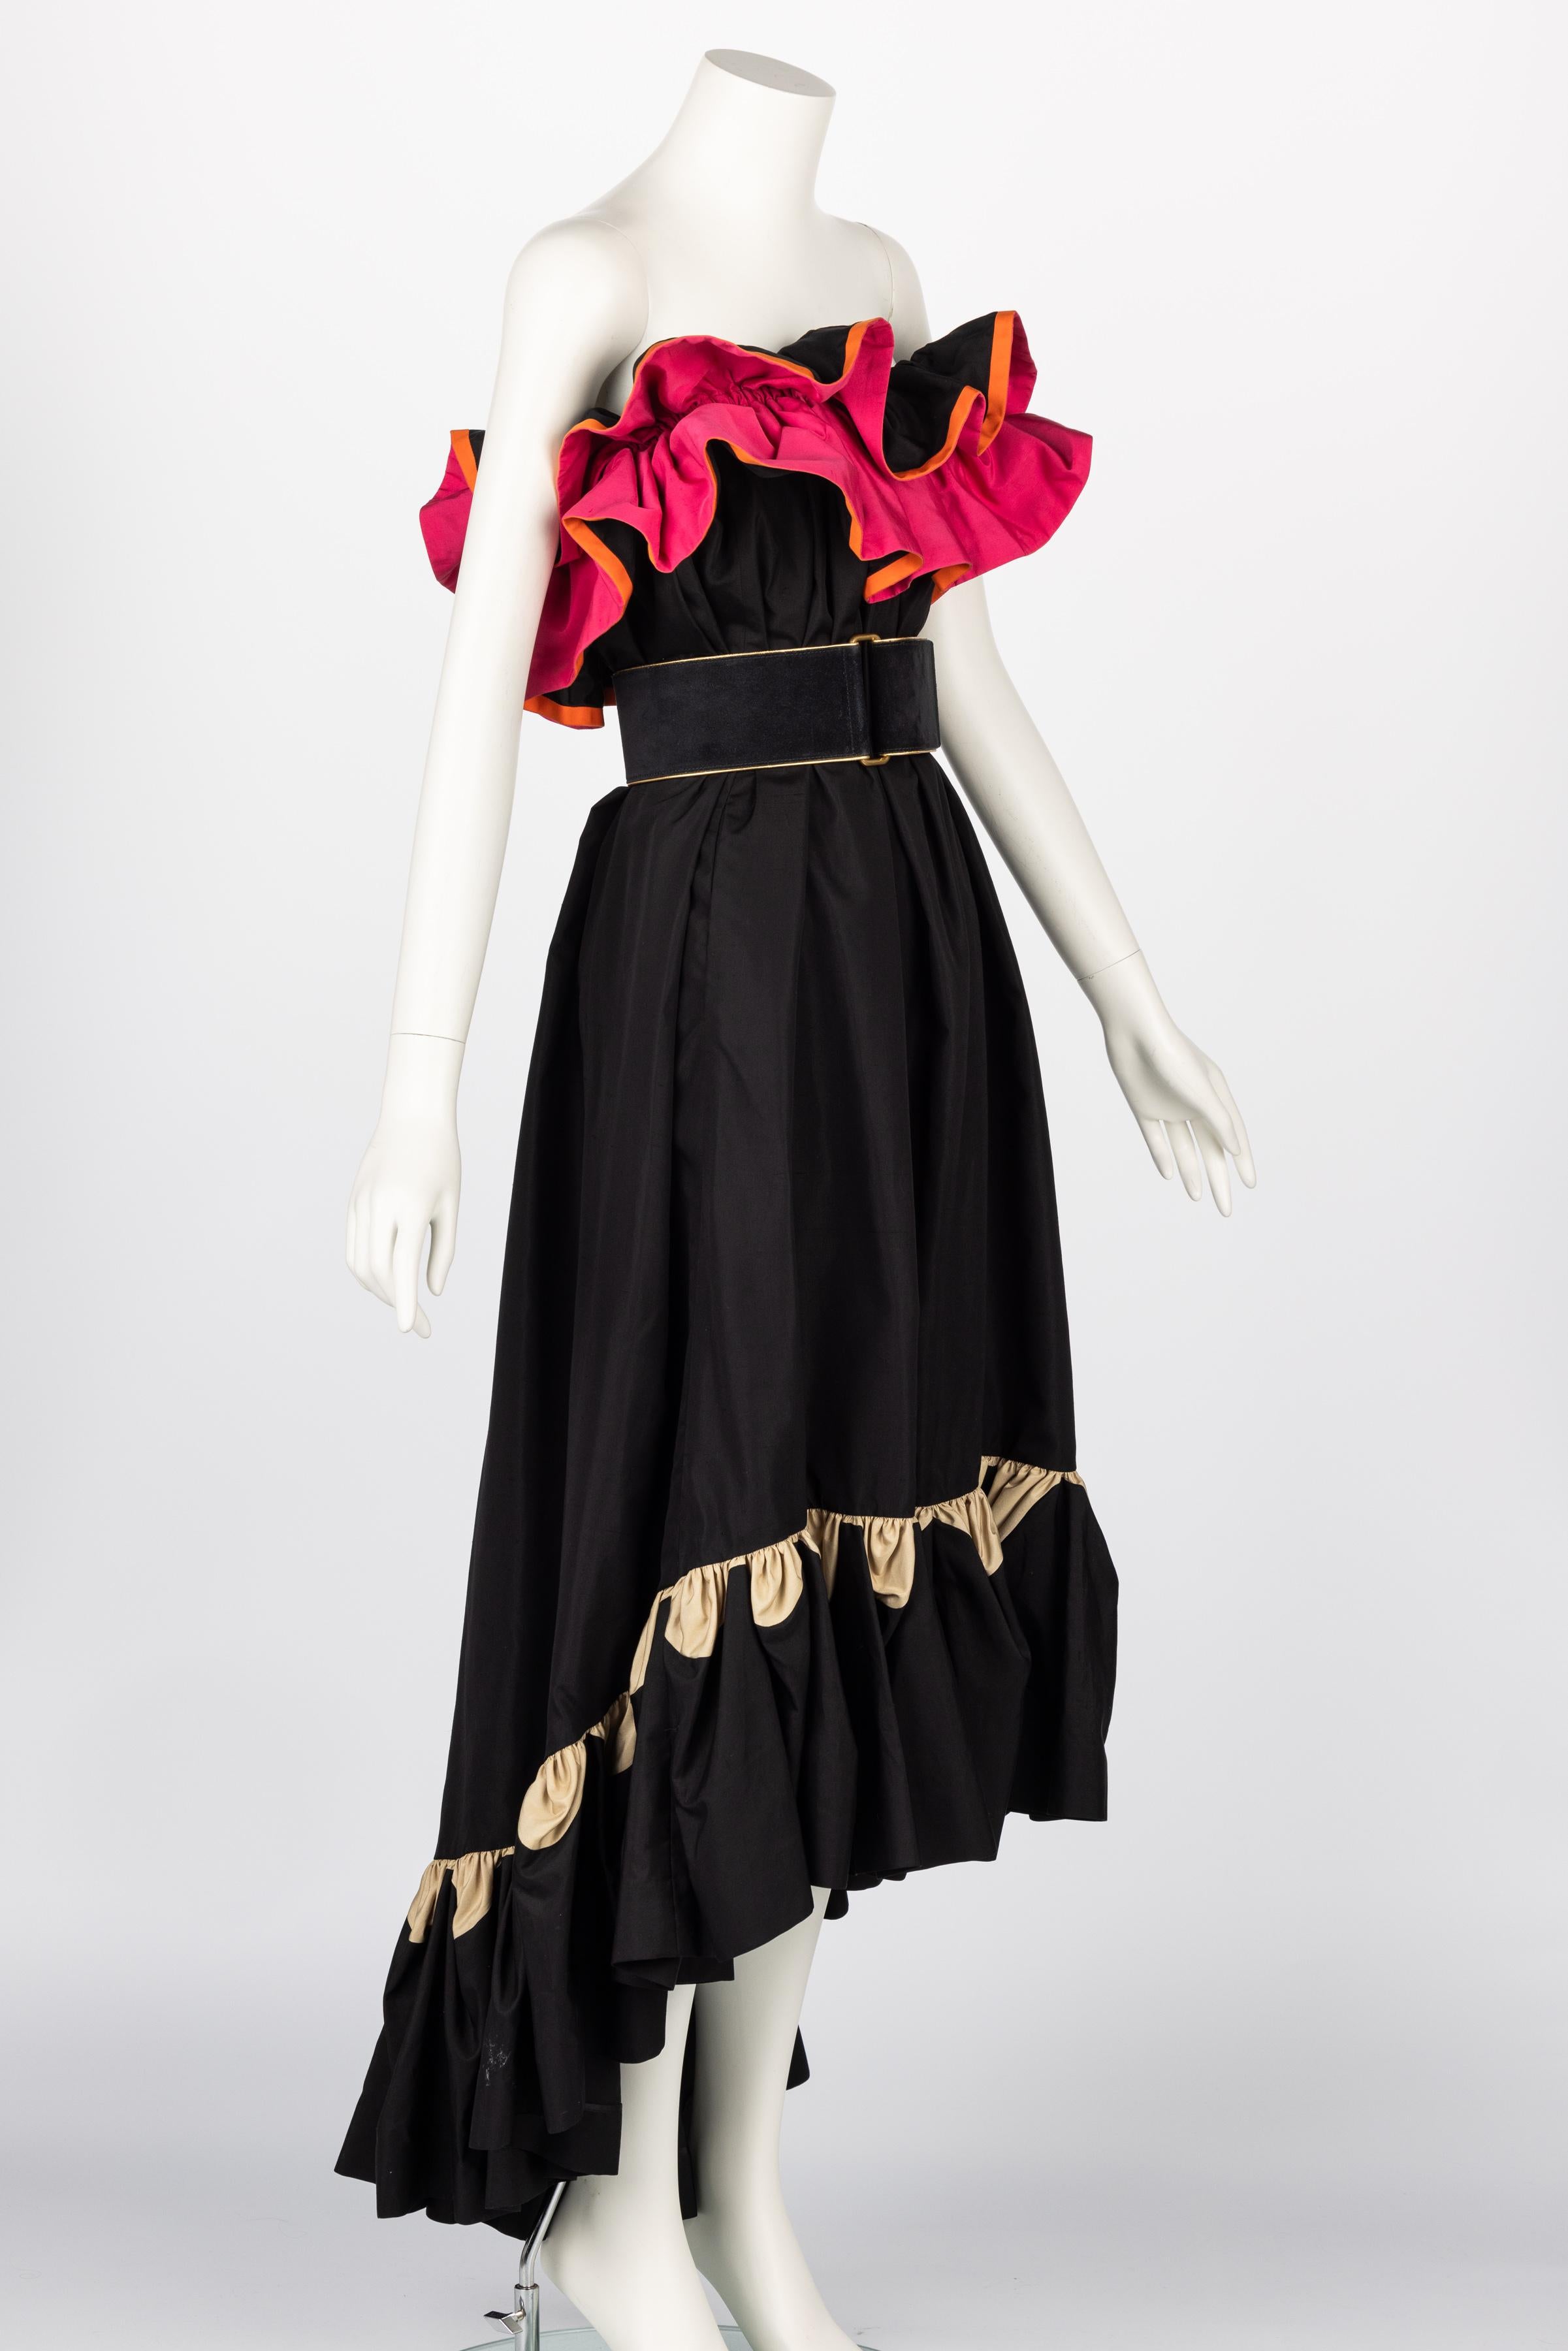 Yves Saint Laurent Runway Balck & Pink Flamenco Dress YSL , Spring 2011 In Excellent Condition For Sale In Boca Raton, FL